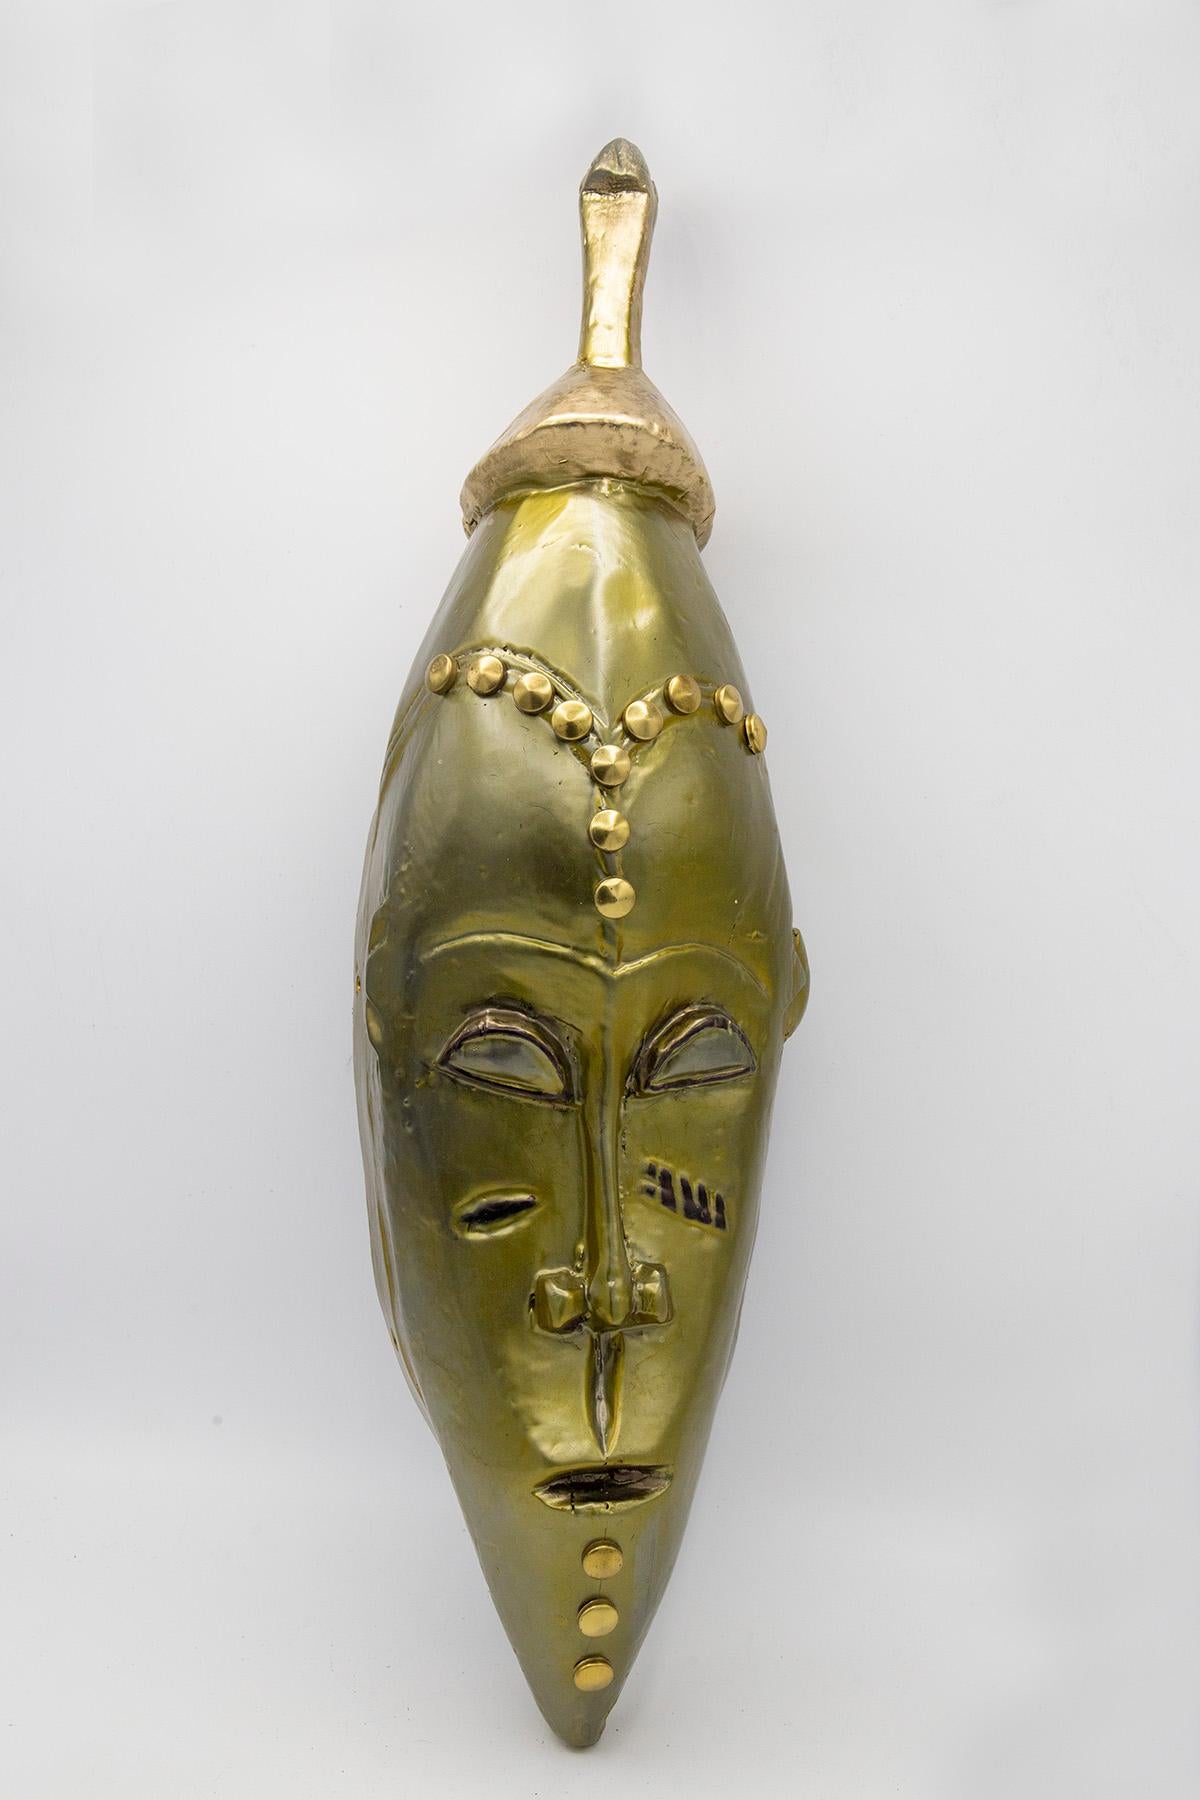 Ivorian African Futurist Gold Mask Created by Bomber Bax For Sale